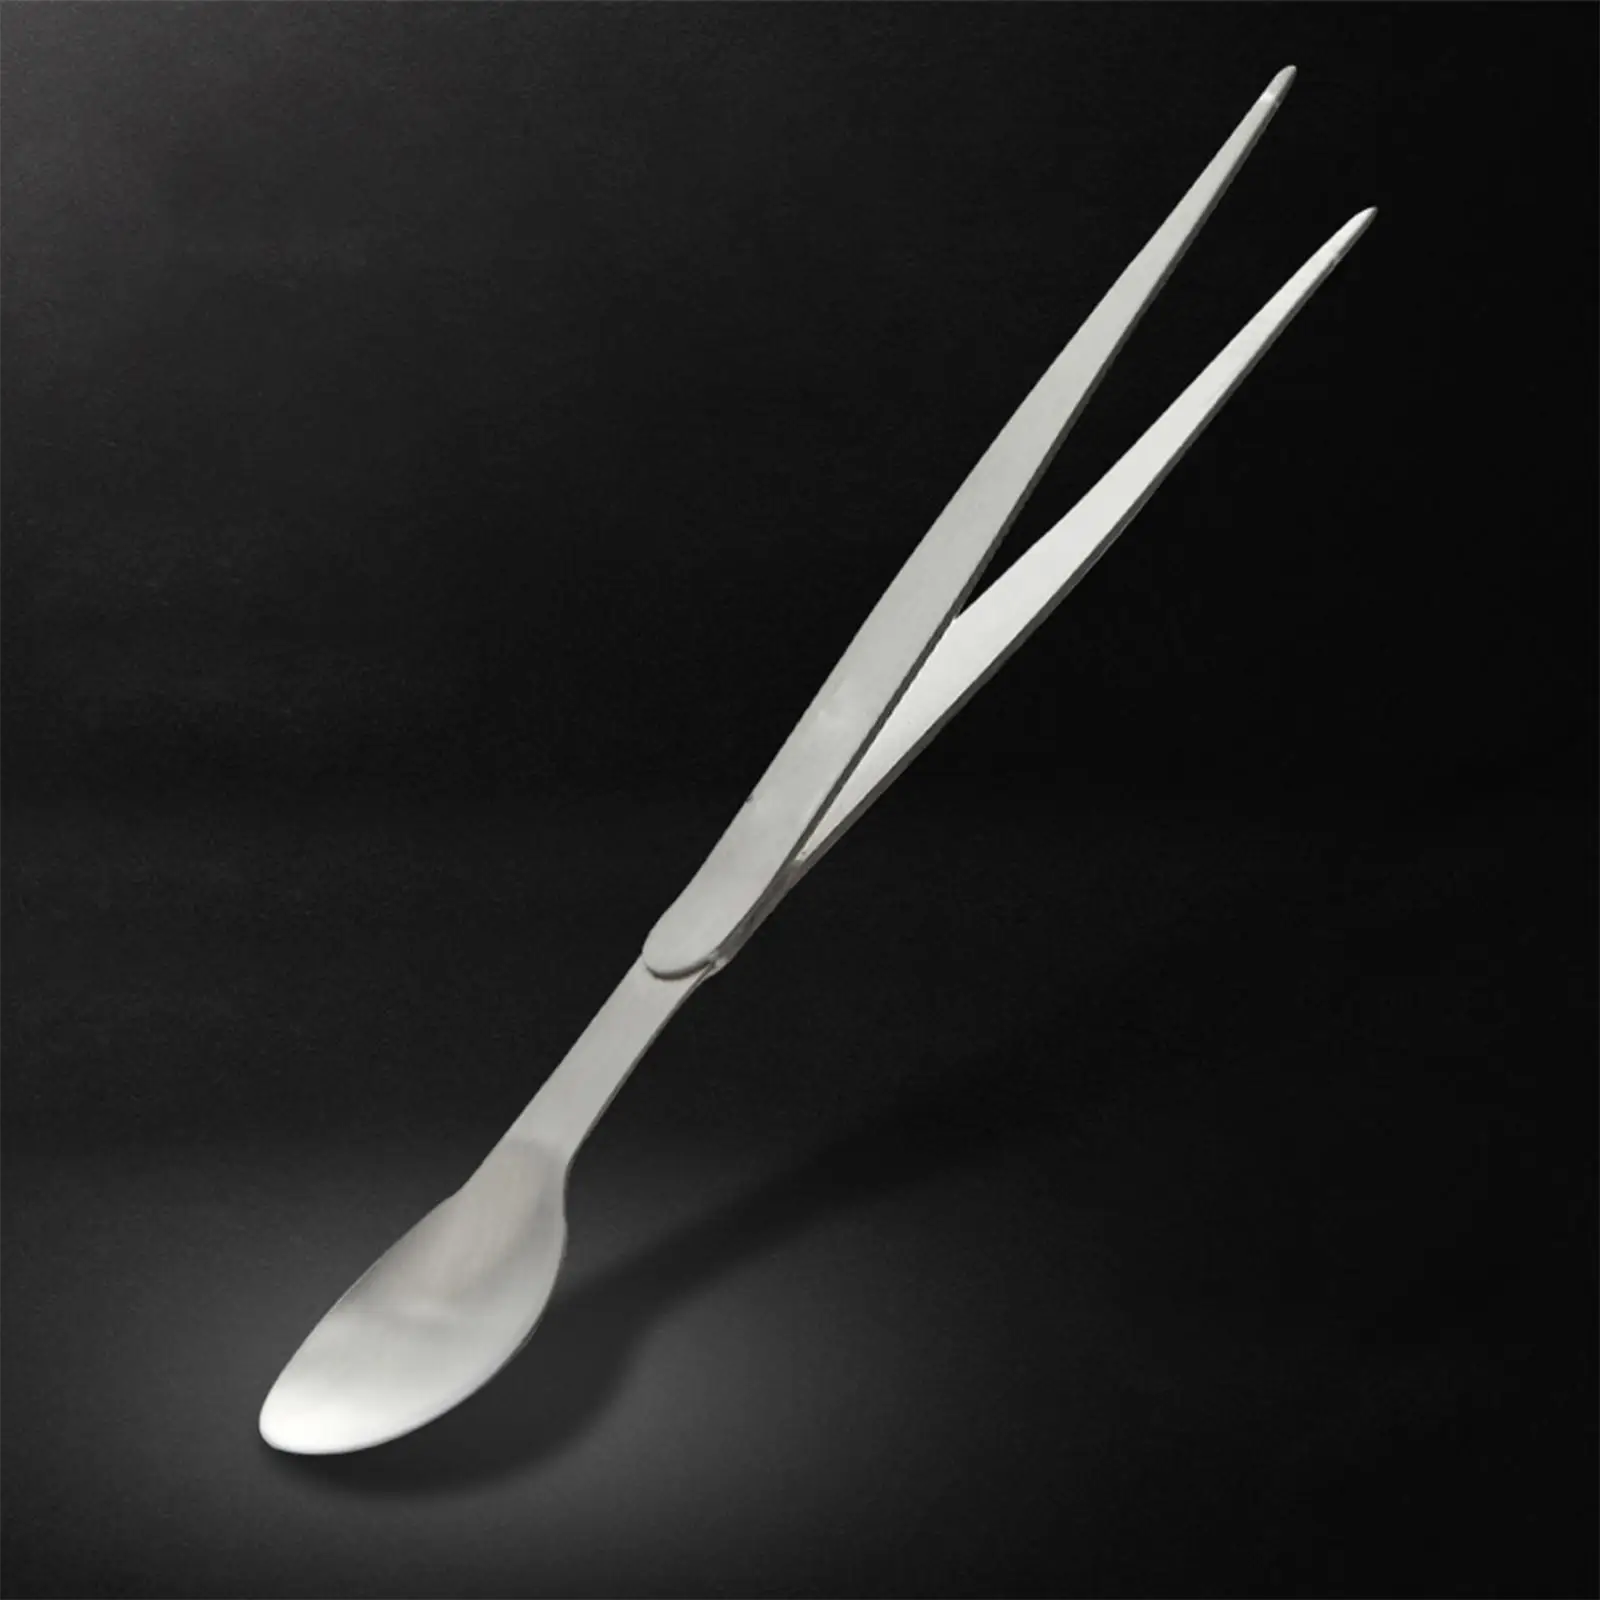 2 in 1 Tasting Spoon Dual Function 20.5cm for Tea Dinner Table kitchen Accessories